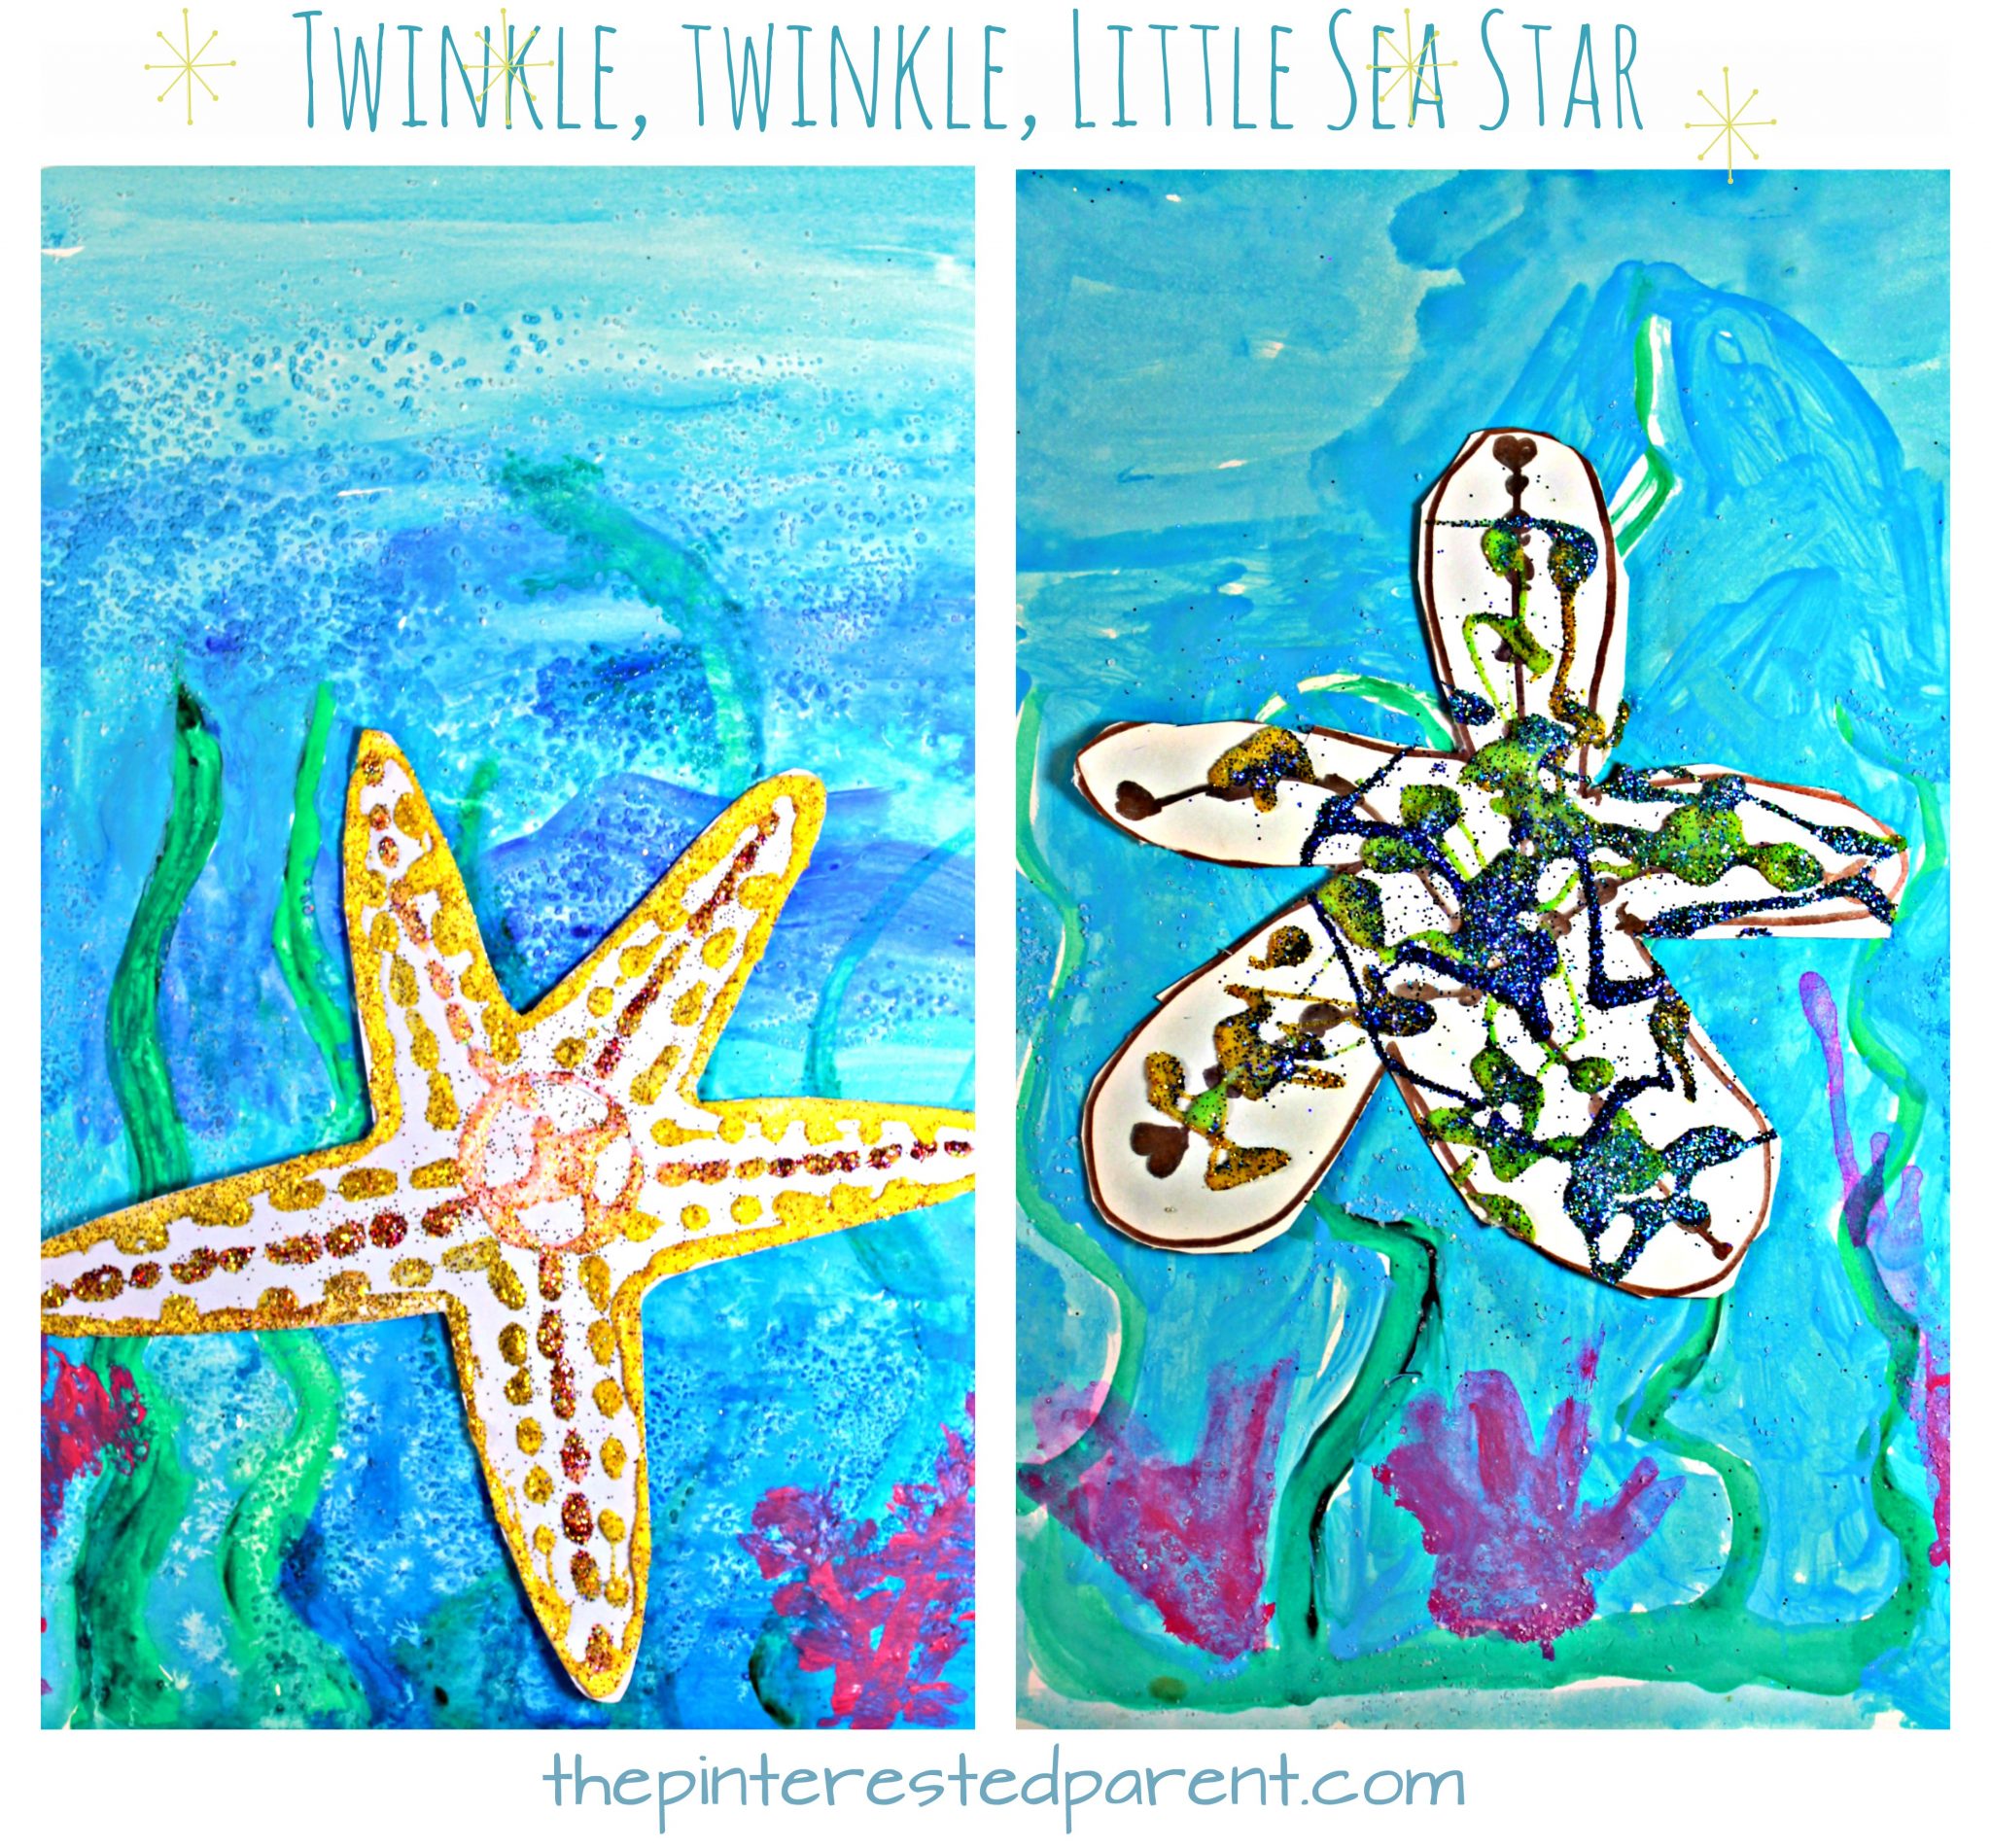 Glitter Sea Star on watercolor paints. Use salt for an additional effect. Under the sea arts and crafts projects for kids and preschoolers. Twinkle, twinkle, little sea star underwater painting